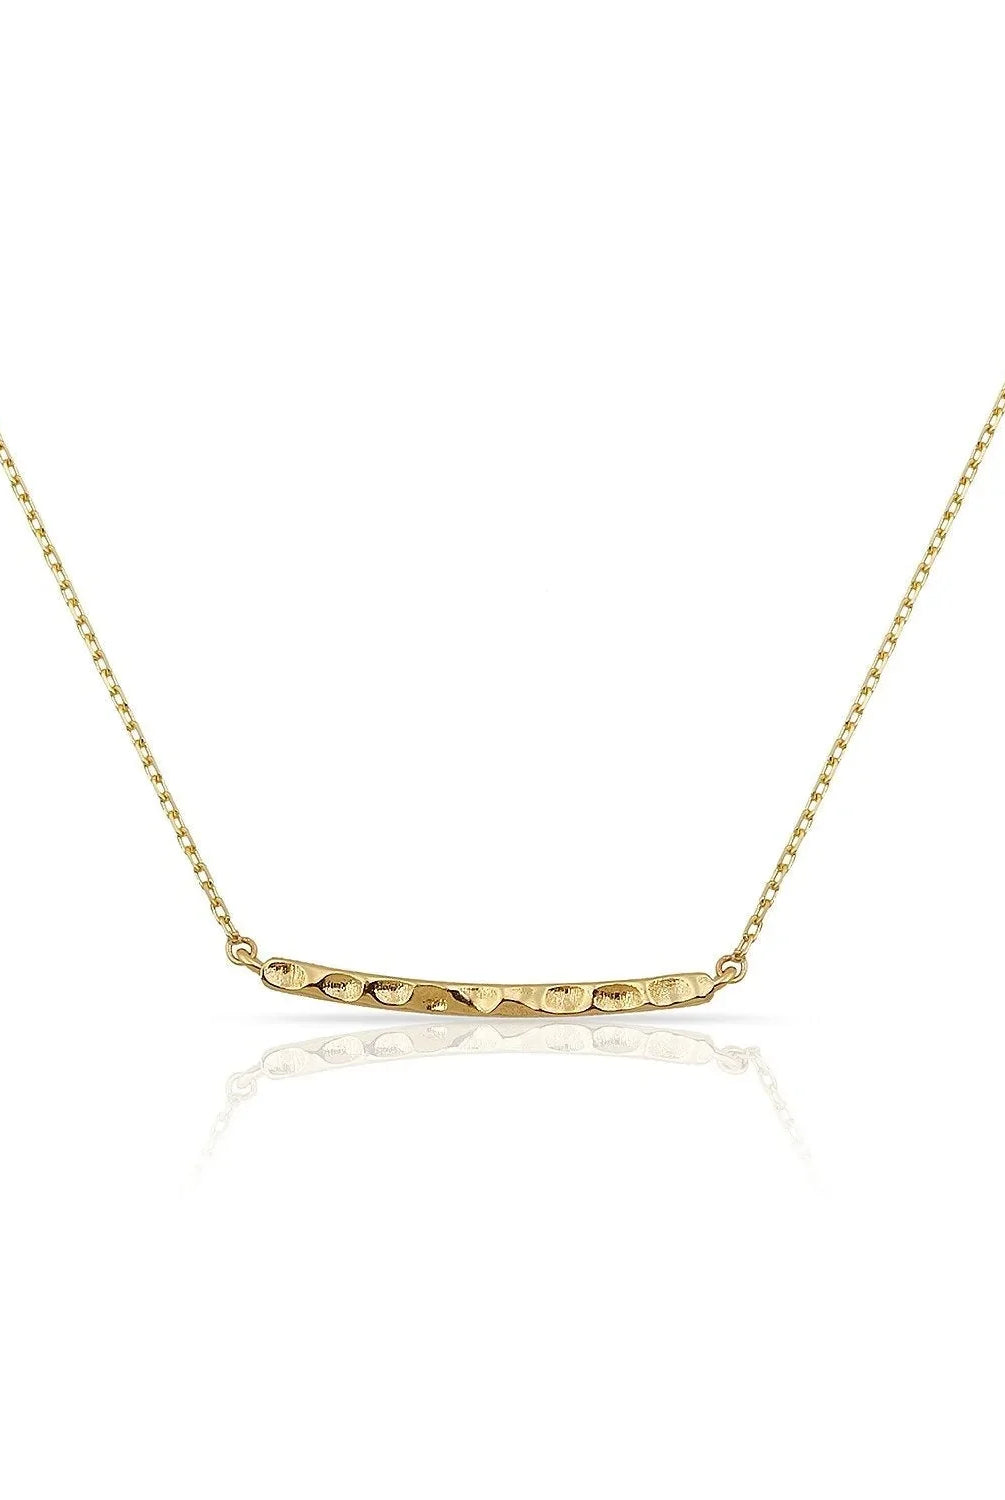 Loverly Hammered Bar Necklace-JEWELRY-The Sis Kiss®-Urban Threadz Boutique, Women's Fashion Boutique in Saugatuck, MI